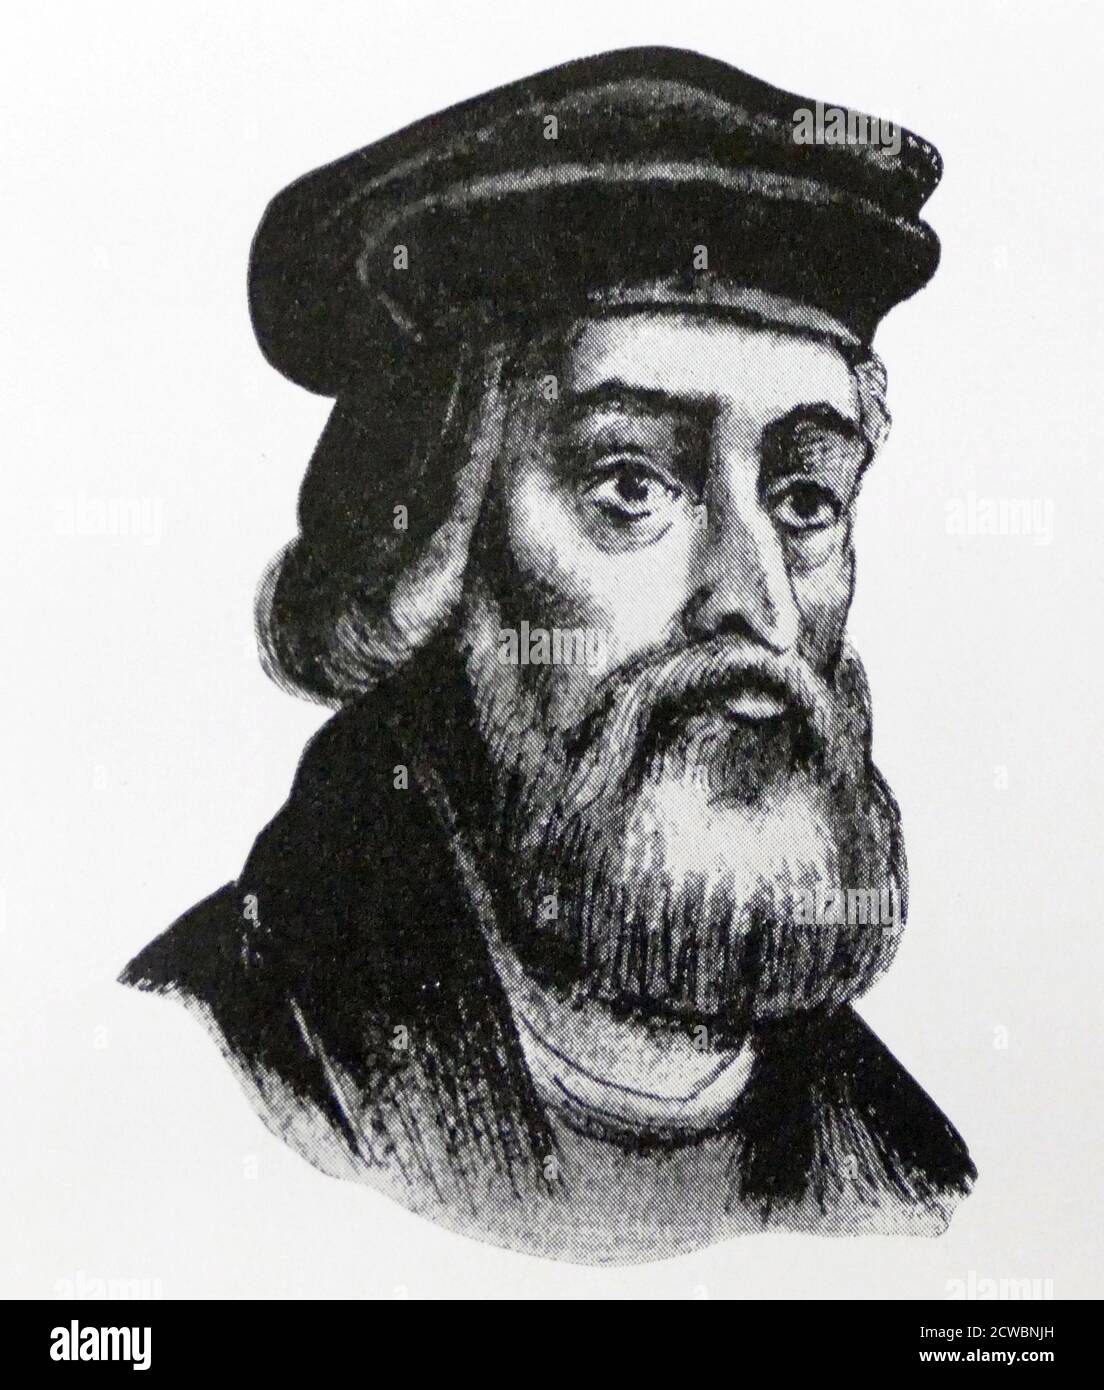 Illustration showing John Wycliffe (c. 1320s - 1384); English scholastic philosopher, theologian, biblical translator, reformer, priest, and a seminary professor at the University of Oxford. He became an influential dissident within the Roman Catholic priesthood during the 14th century and is considered an important predecessor to Protestantism. Stock Photo